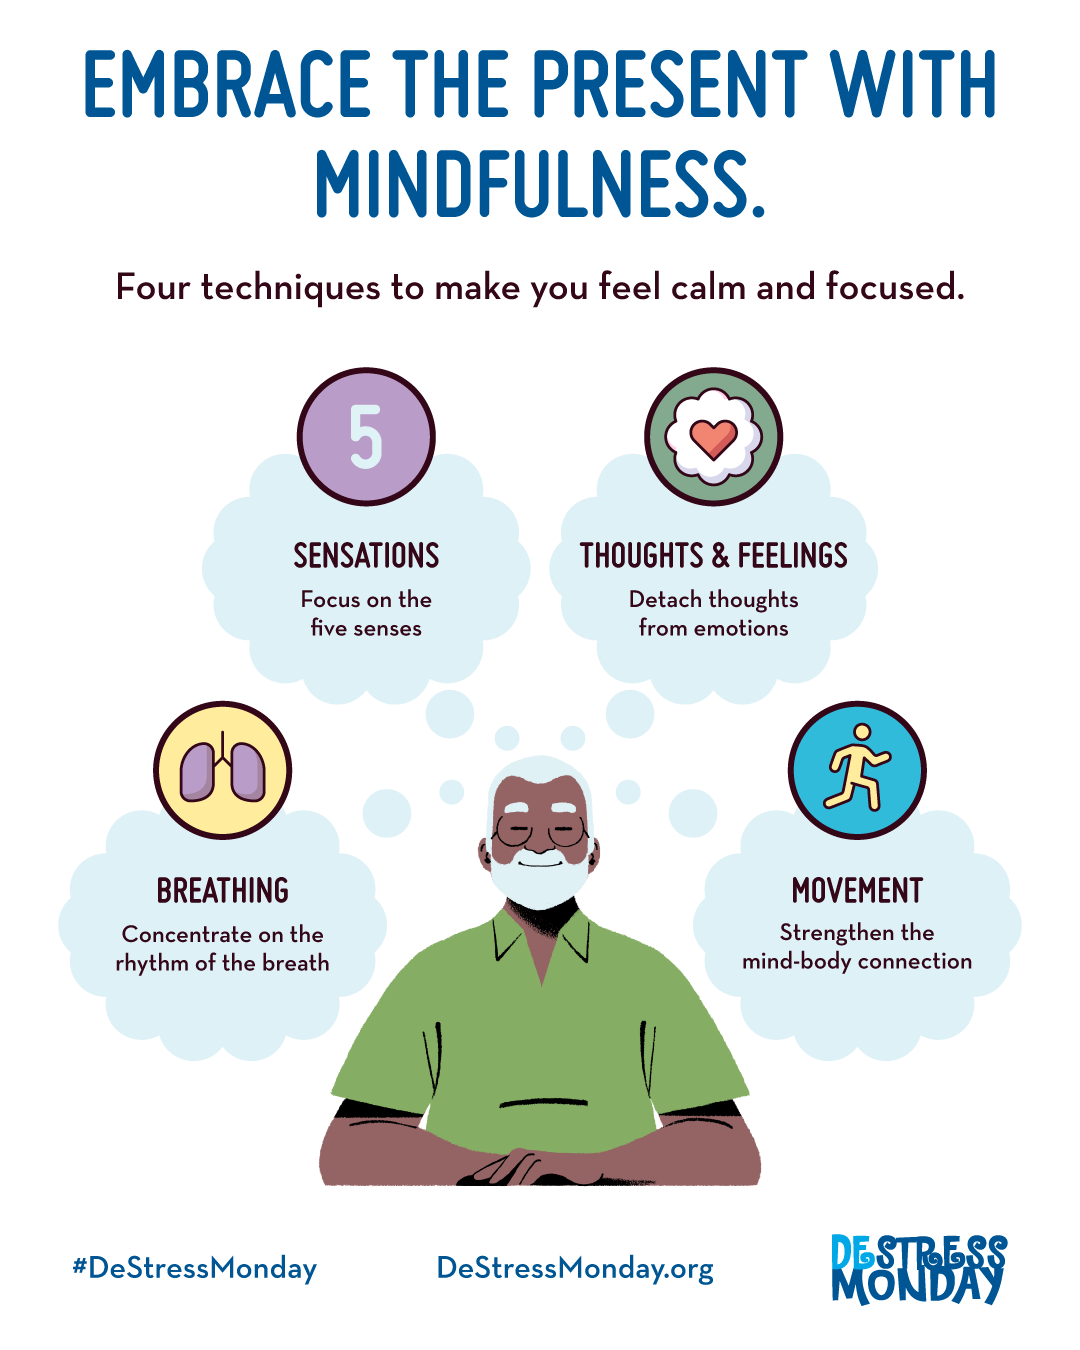 Embrace the present with mindfulness. Four techniques to make you feel calm and focused.